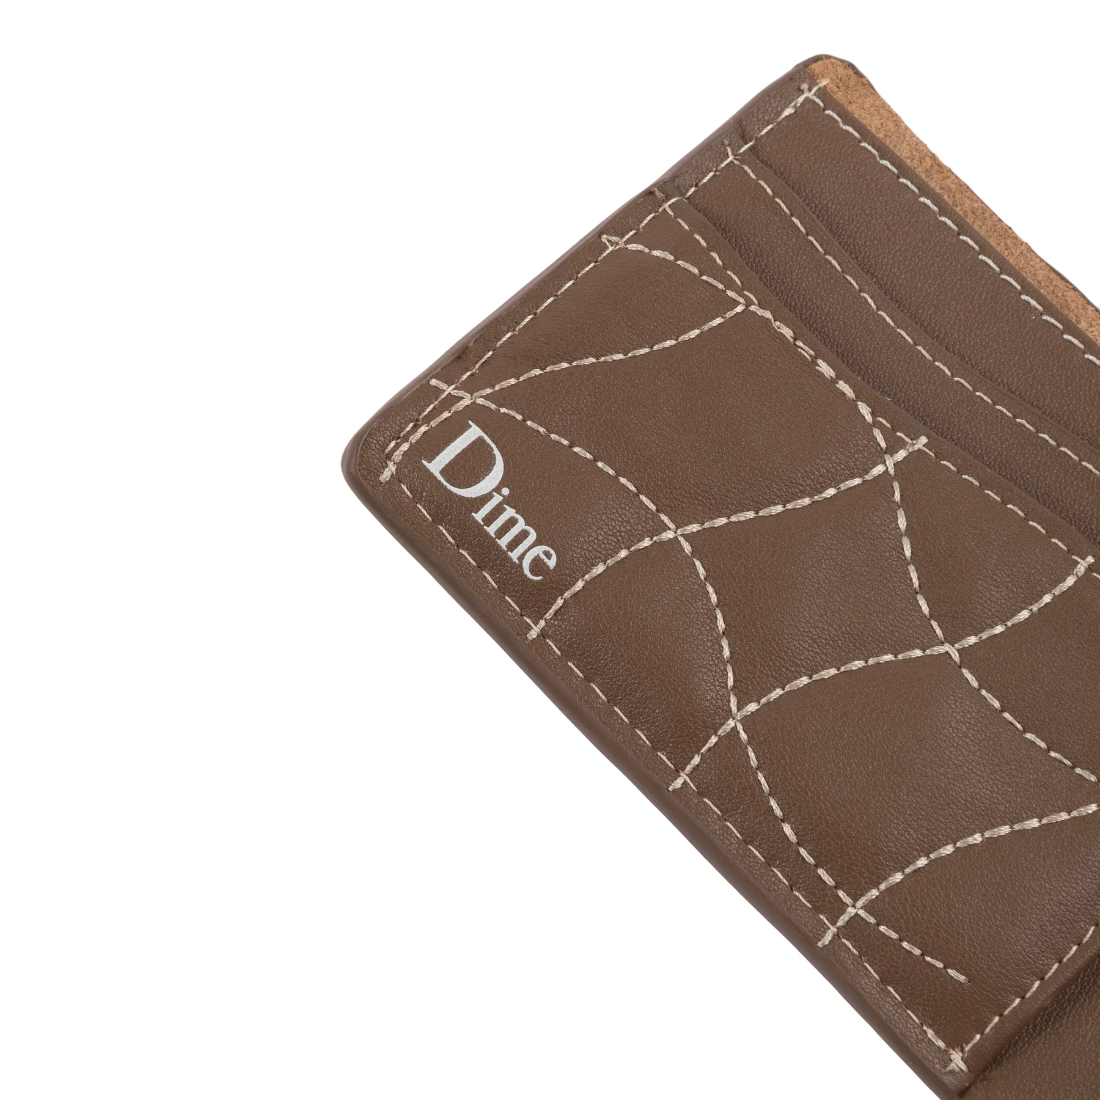 【Dime】Quilted Bifold wallet - Brown